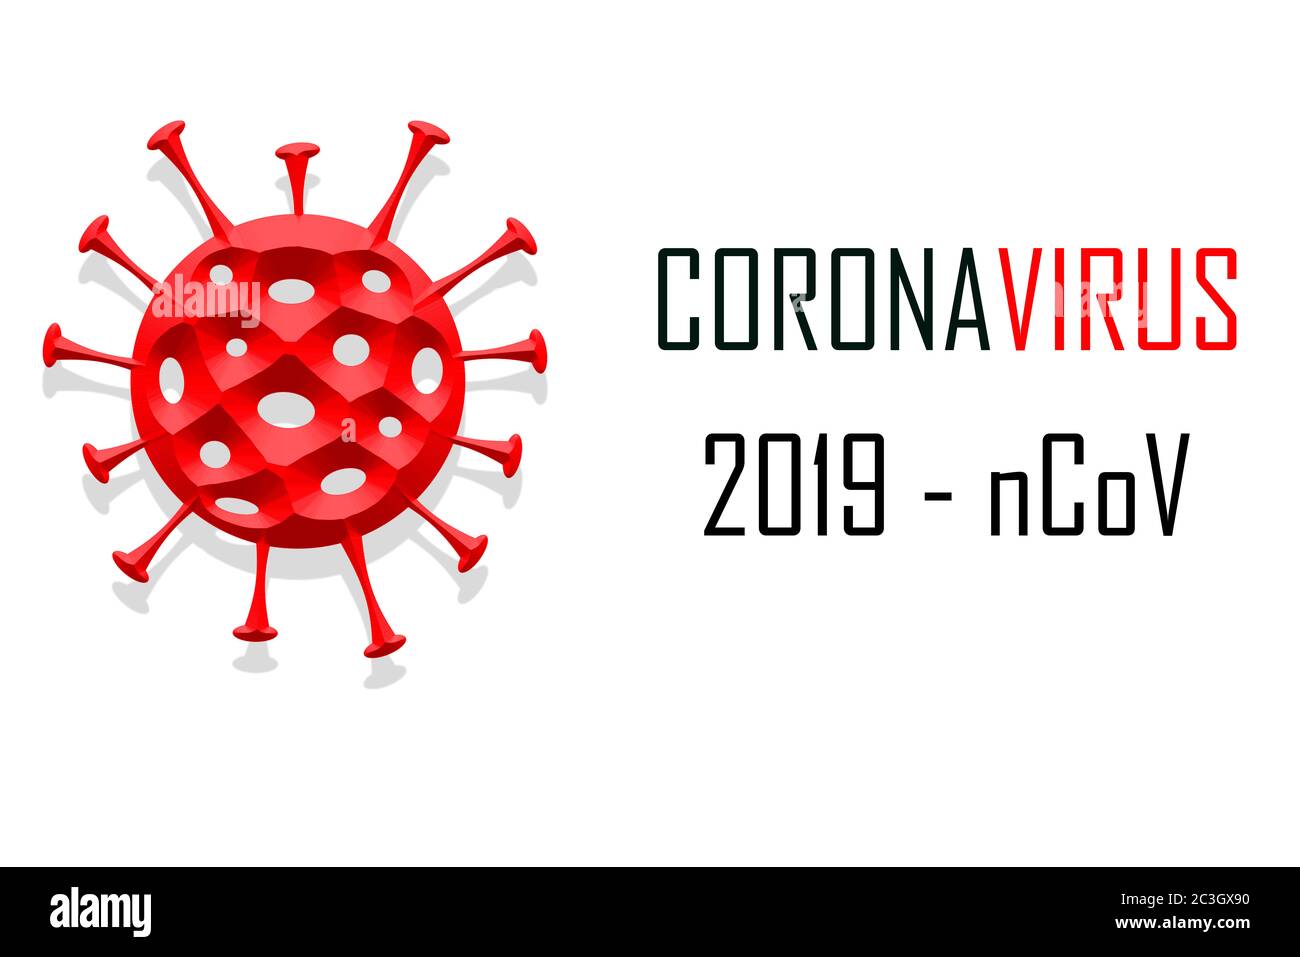 Background with the text 'Coronavirus, 2019 - ncov', and the symbol of a virus in relief and red color, on a white background. Covid19, coronavirus, c Stock Photo